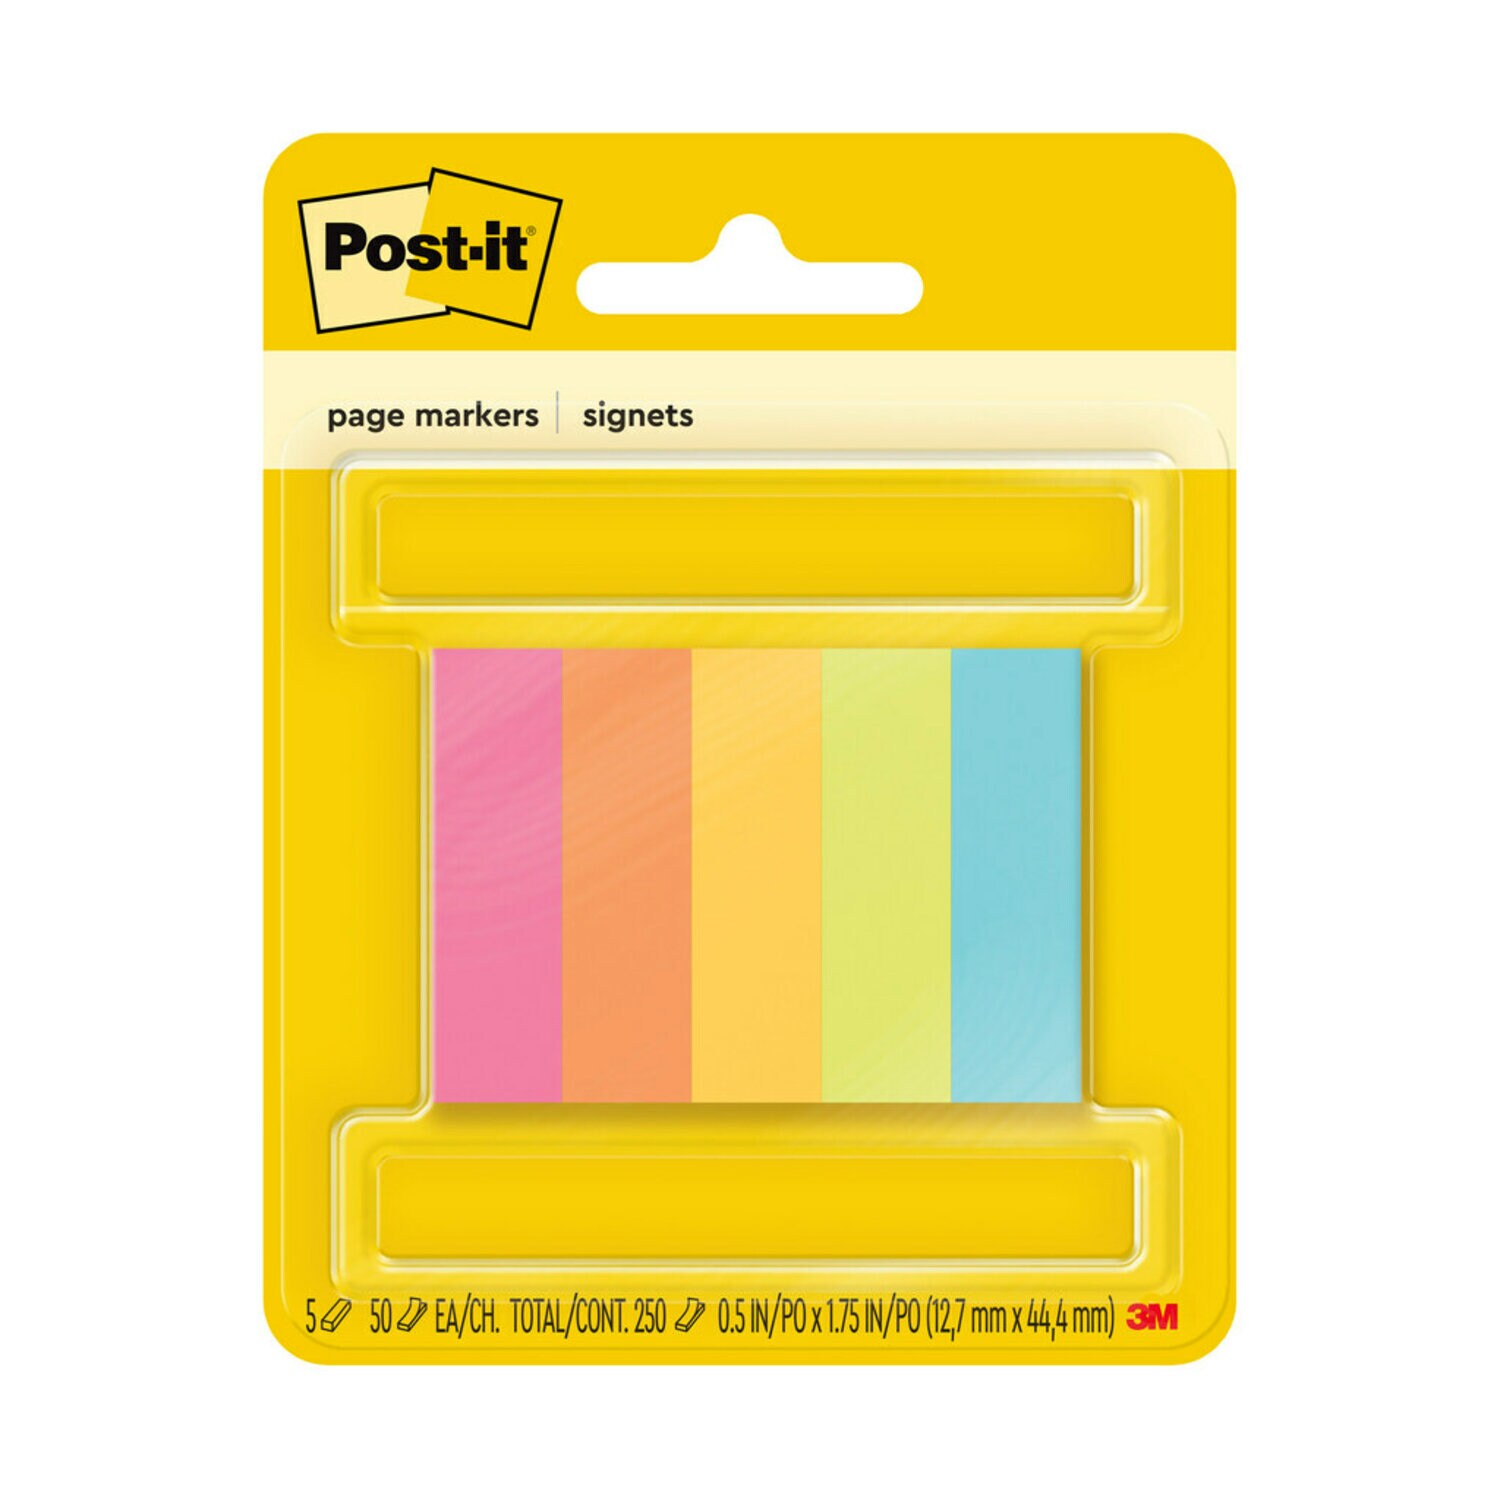 7100036469 - Post-it Page Markers 670-5AF, 0.5 in x 1.75 in (12,7 mm x 44,4 mm)